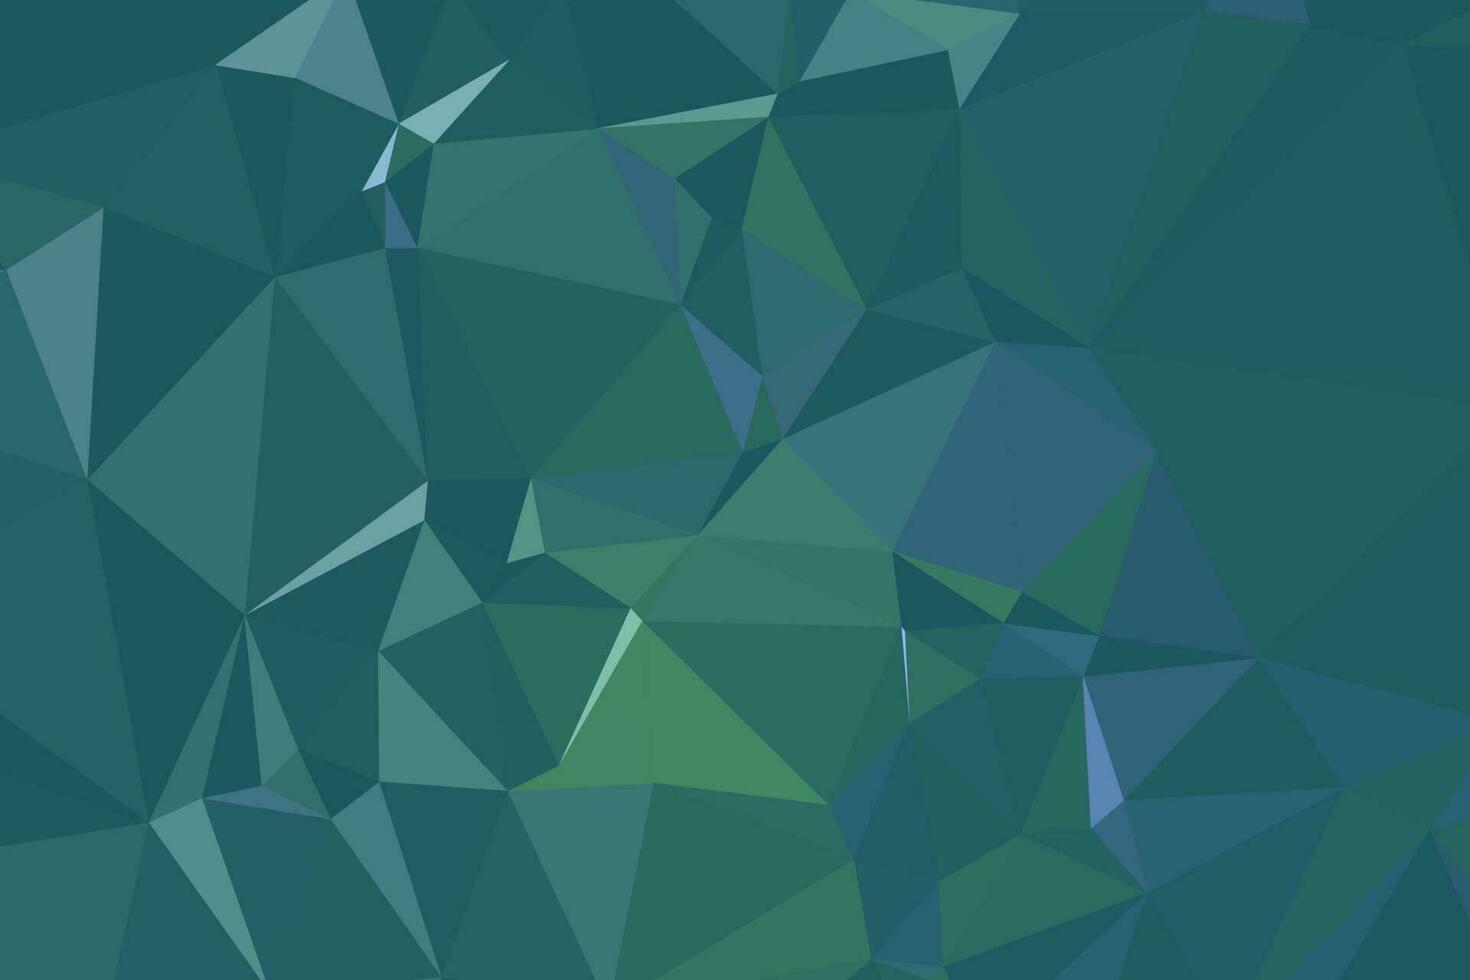 Abstract textured Dark Green polygonal background. low poly geometric consisting of triangles of different sizes and colors. use in design cover, presentation, business card or website. vector